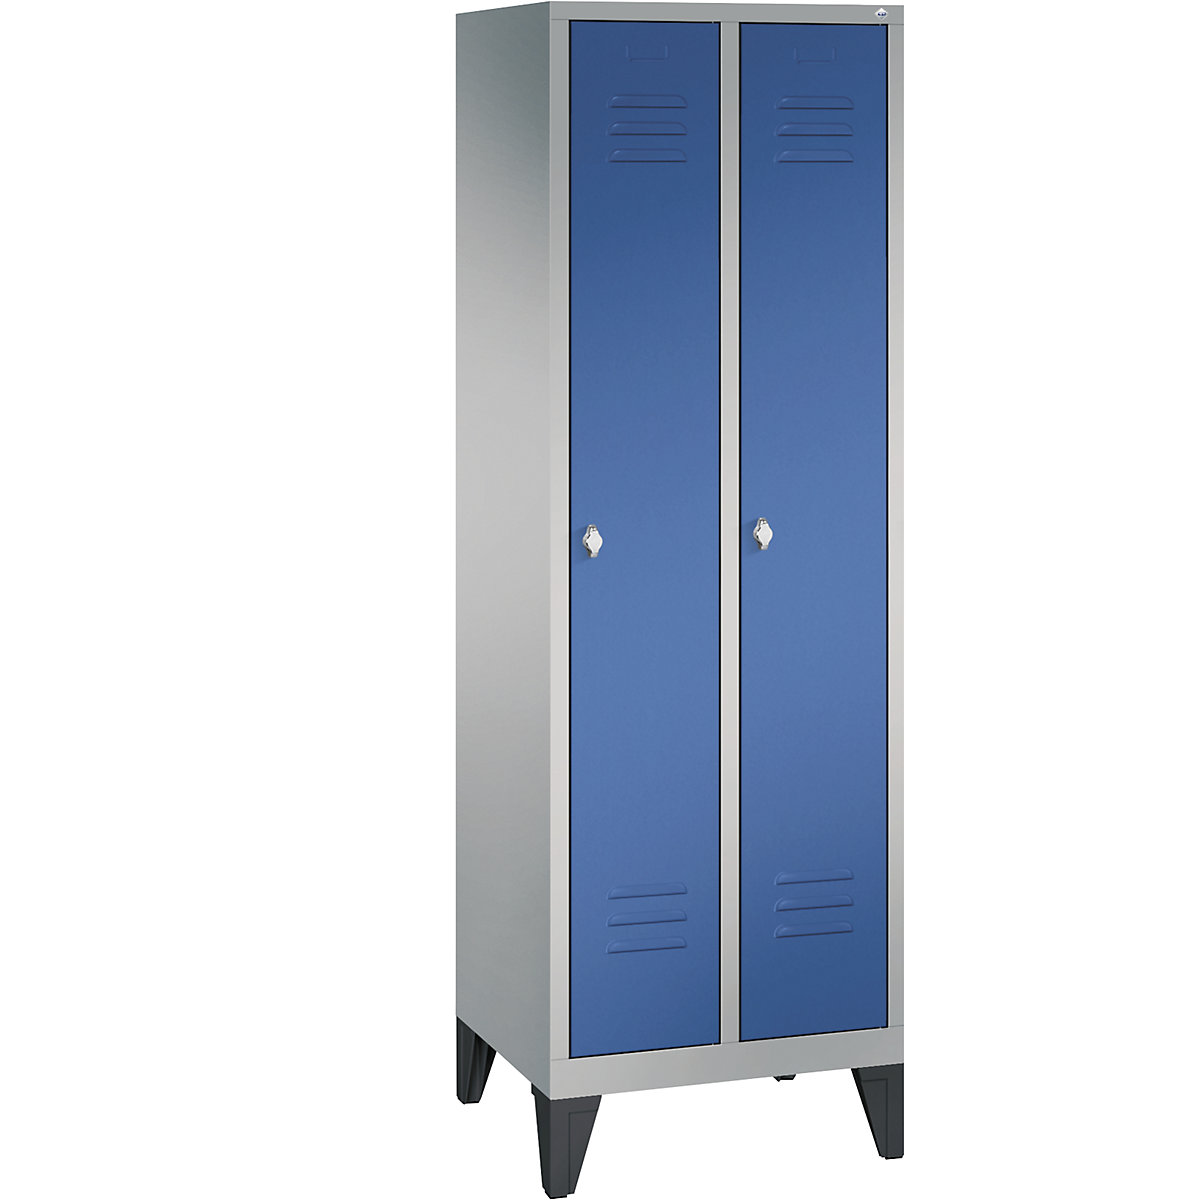 CLASSIC storage cupboard with feet – C+P, 2 compartments, compartment width 300 mm, white aluminium / gentian blue-10